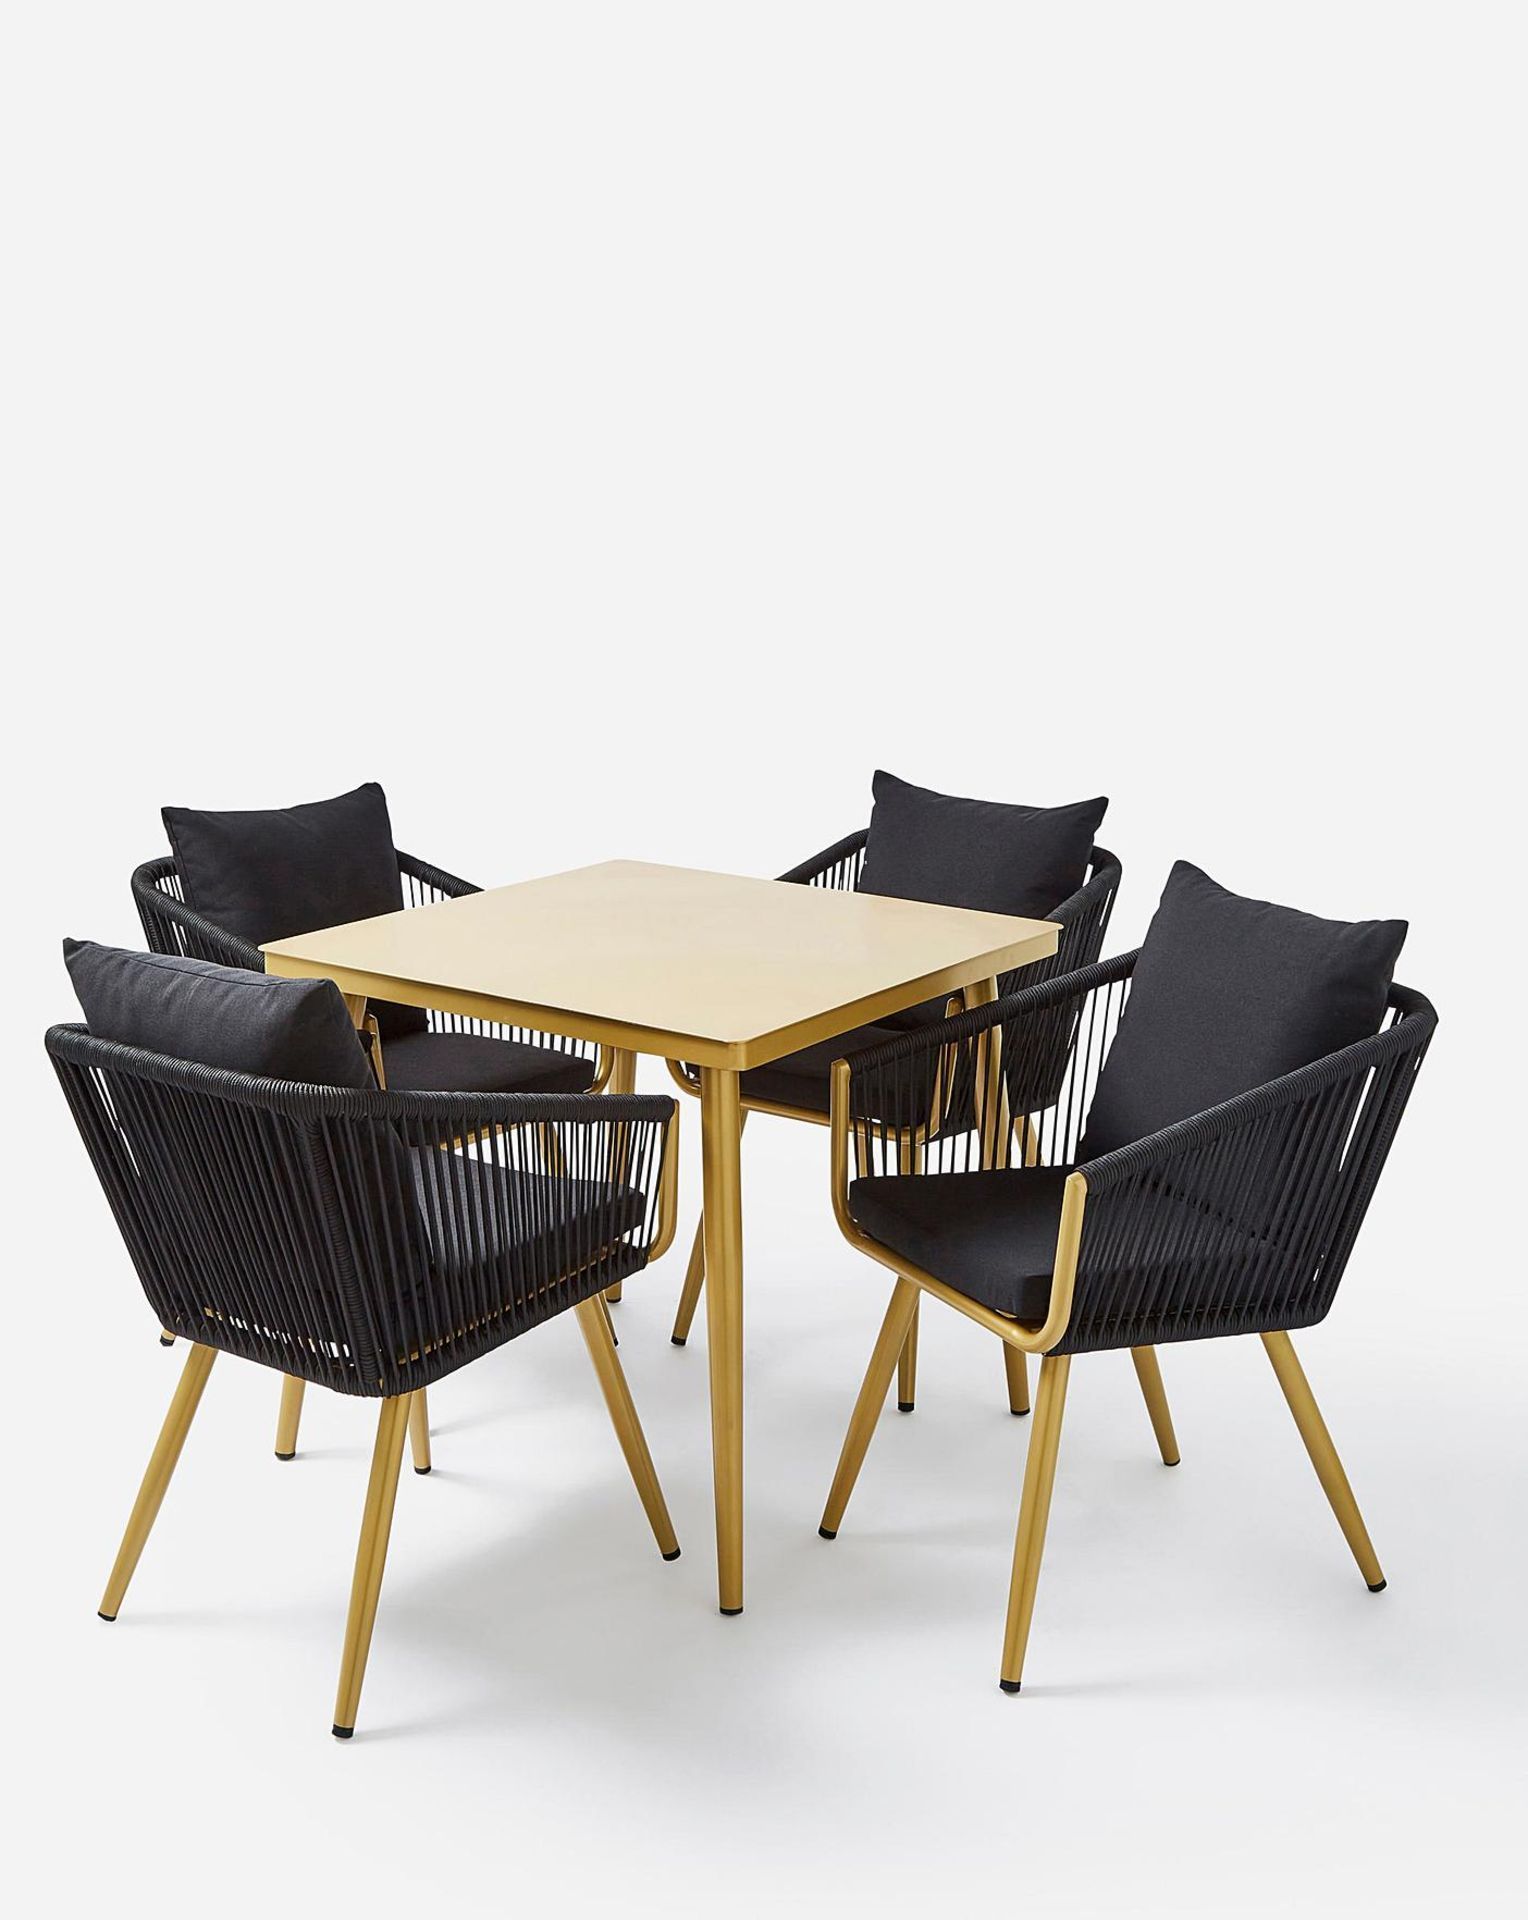 Trade Lot 4 x New & Packaged Joanna Hope Naya 4 Seater Dining Sets. RRP £719 each. This Exclusive - Image 4 of 5